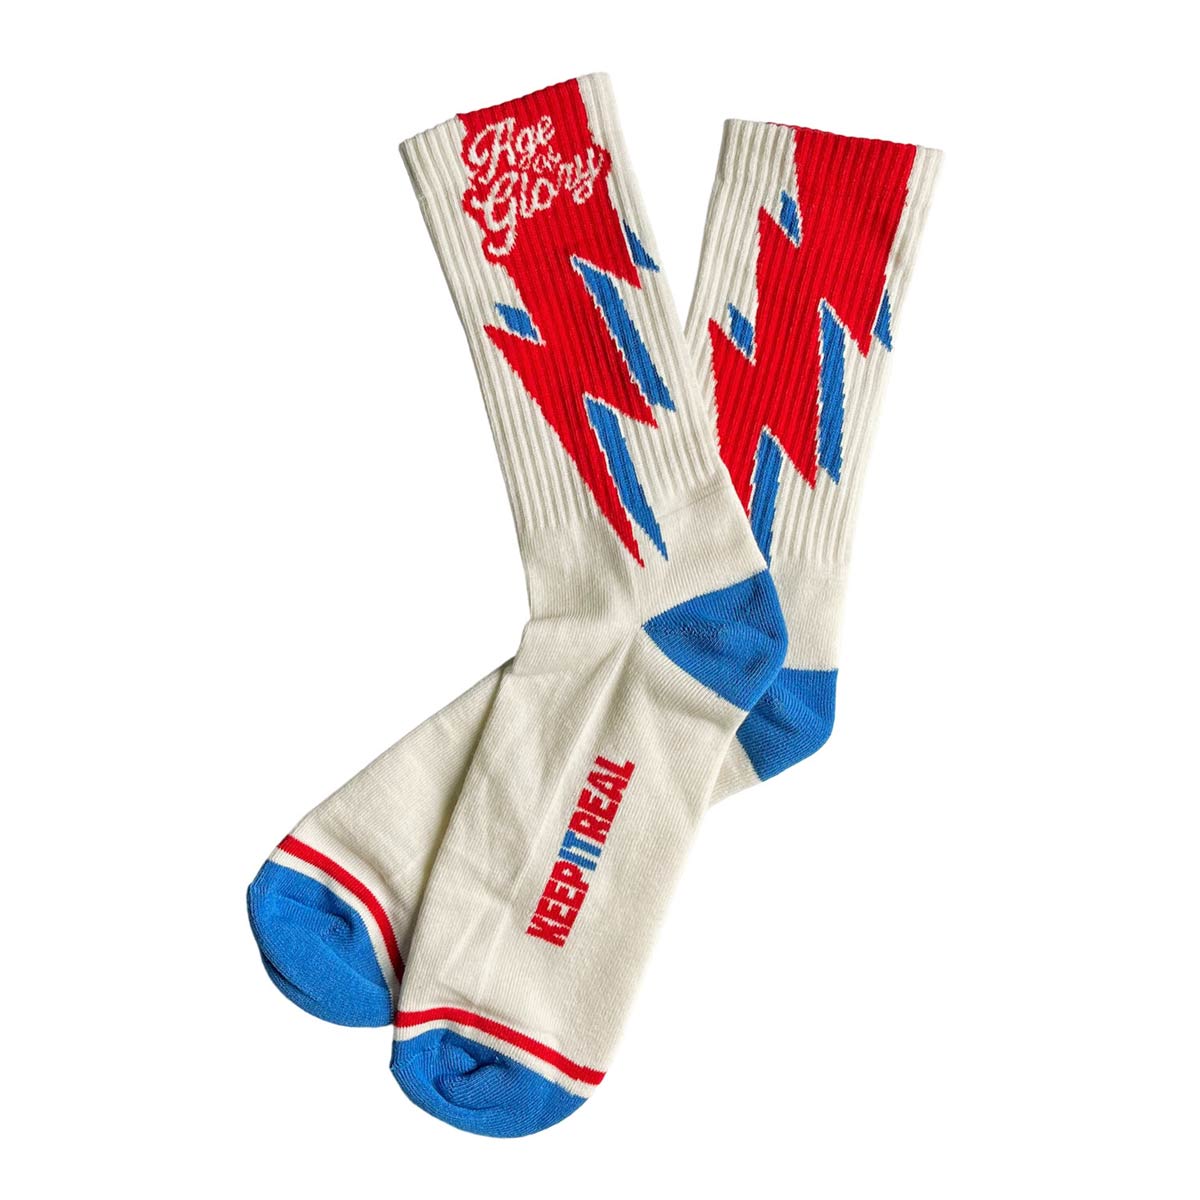 Age of Glory Bolts Socks White/Red/Blue